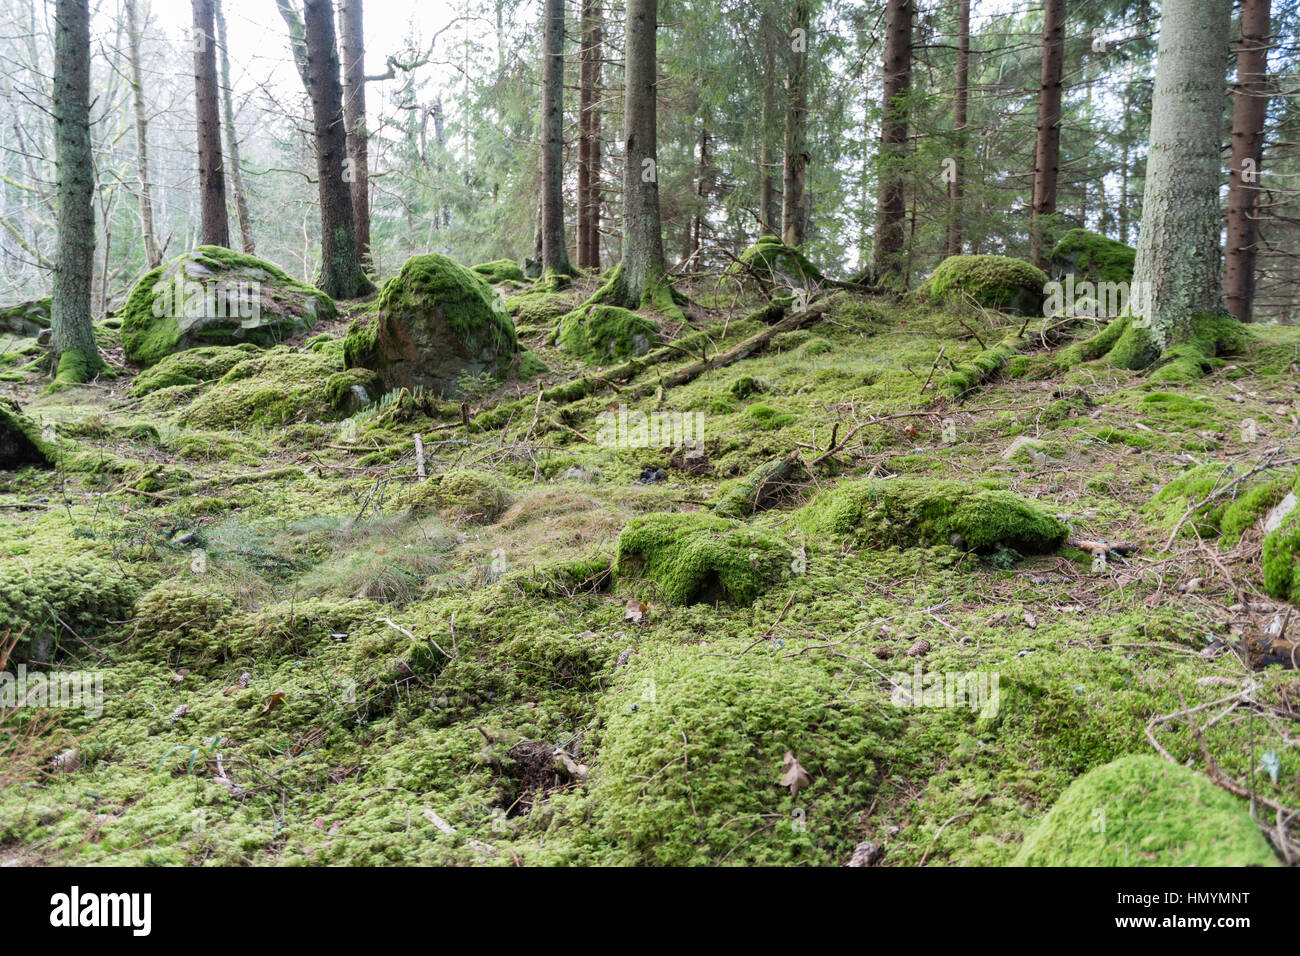 Untouched old mossy forest with rocks and tree trunks Stock Photo